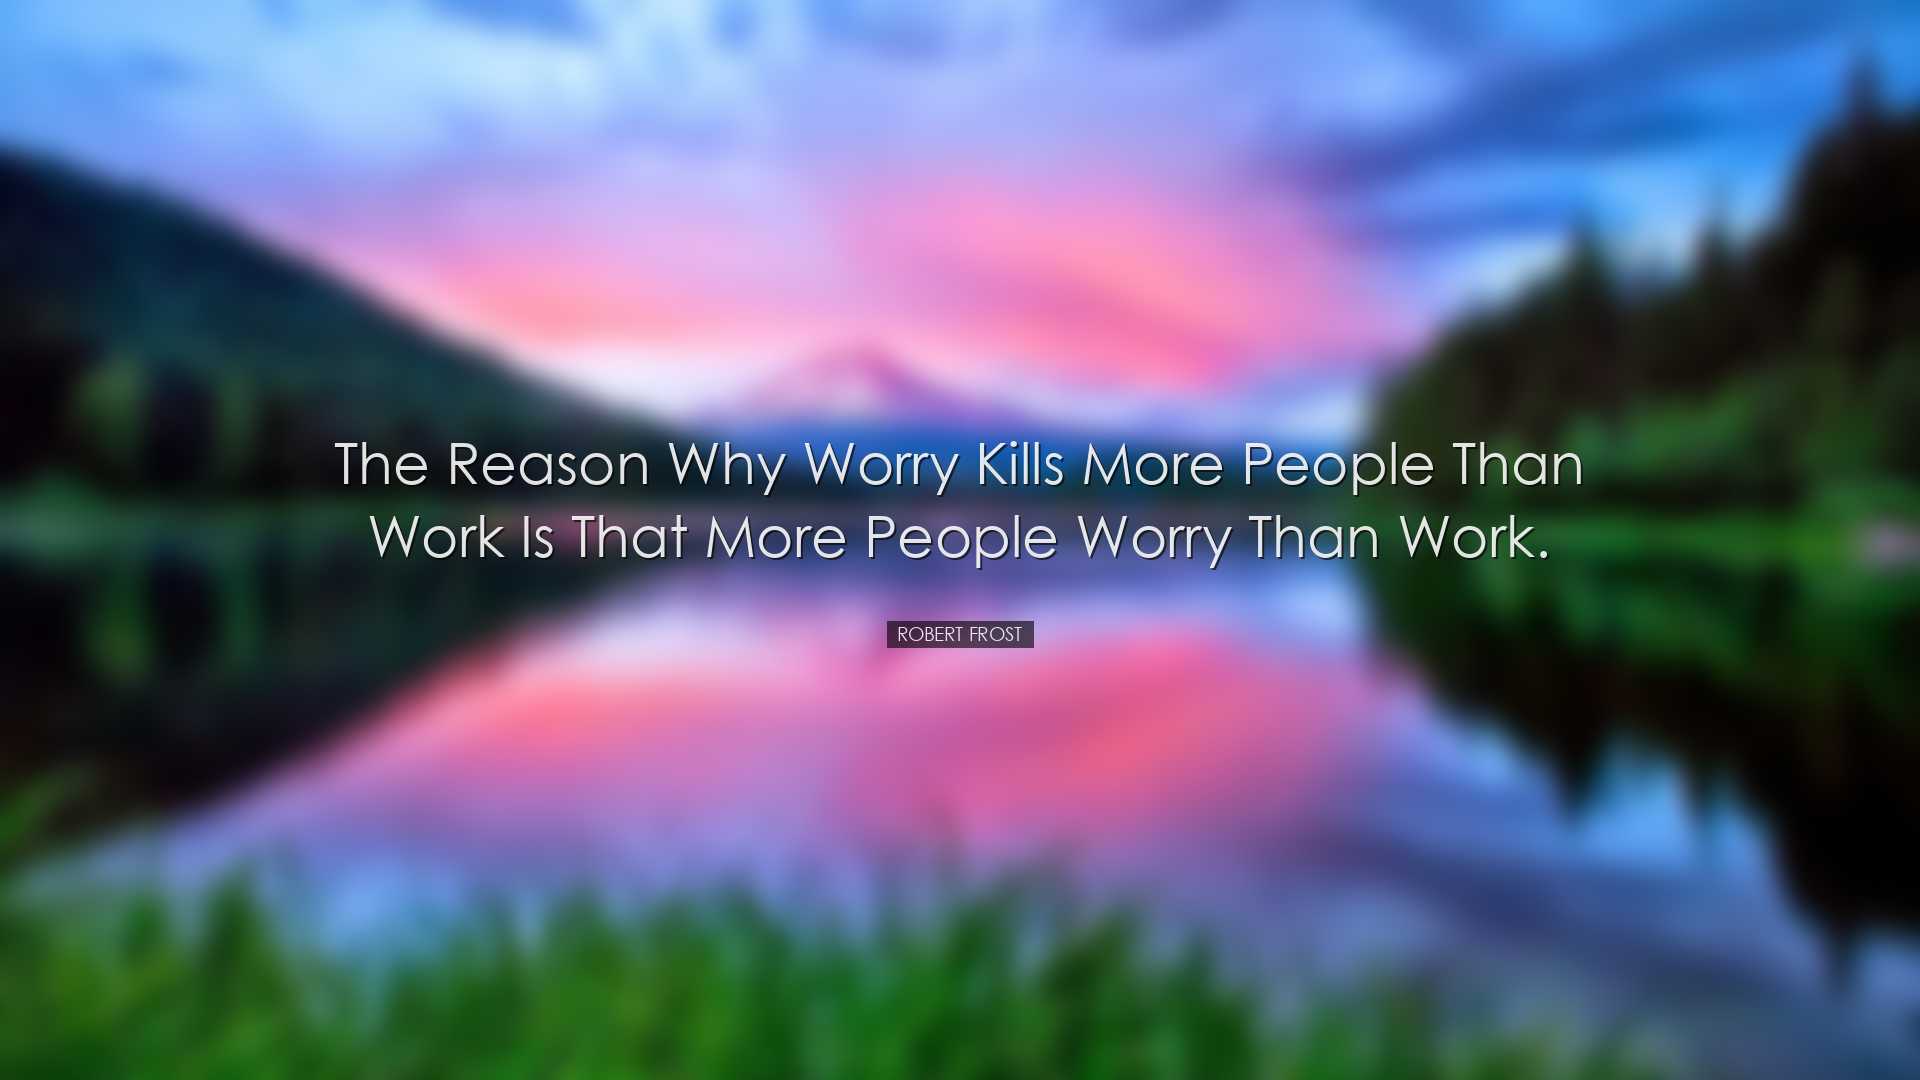 The reason why worry kills more people than work is that more peop